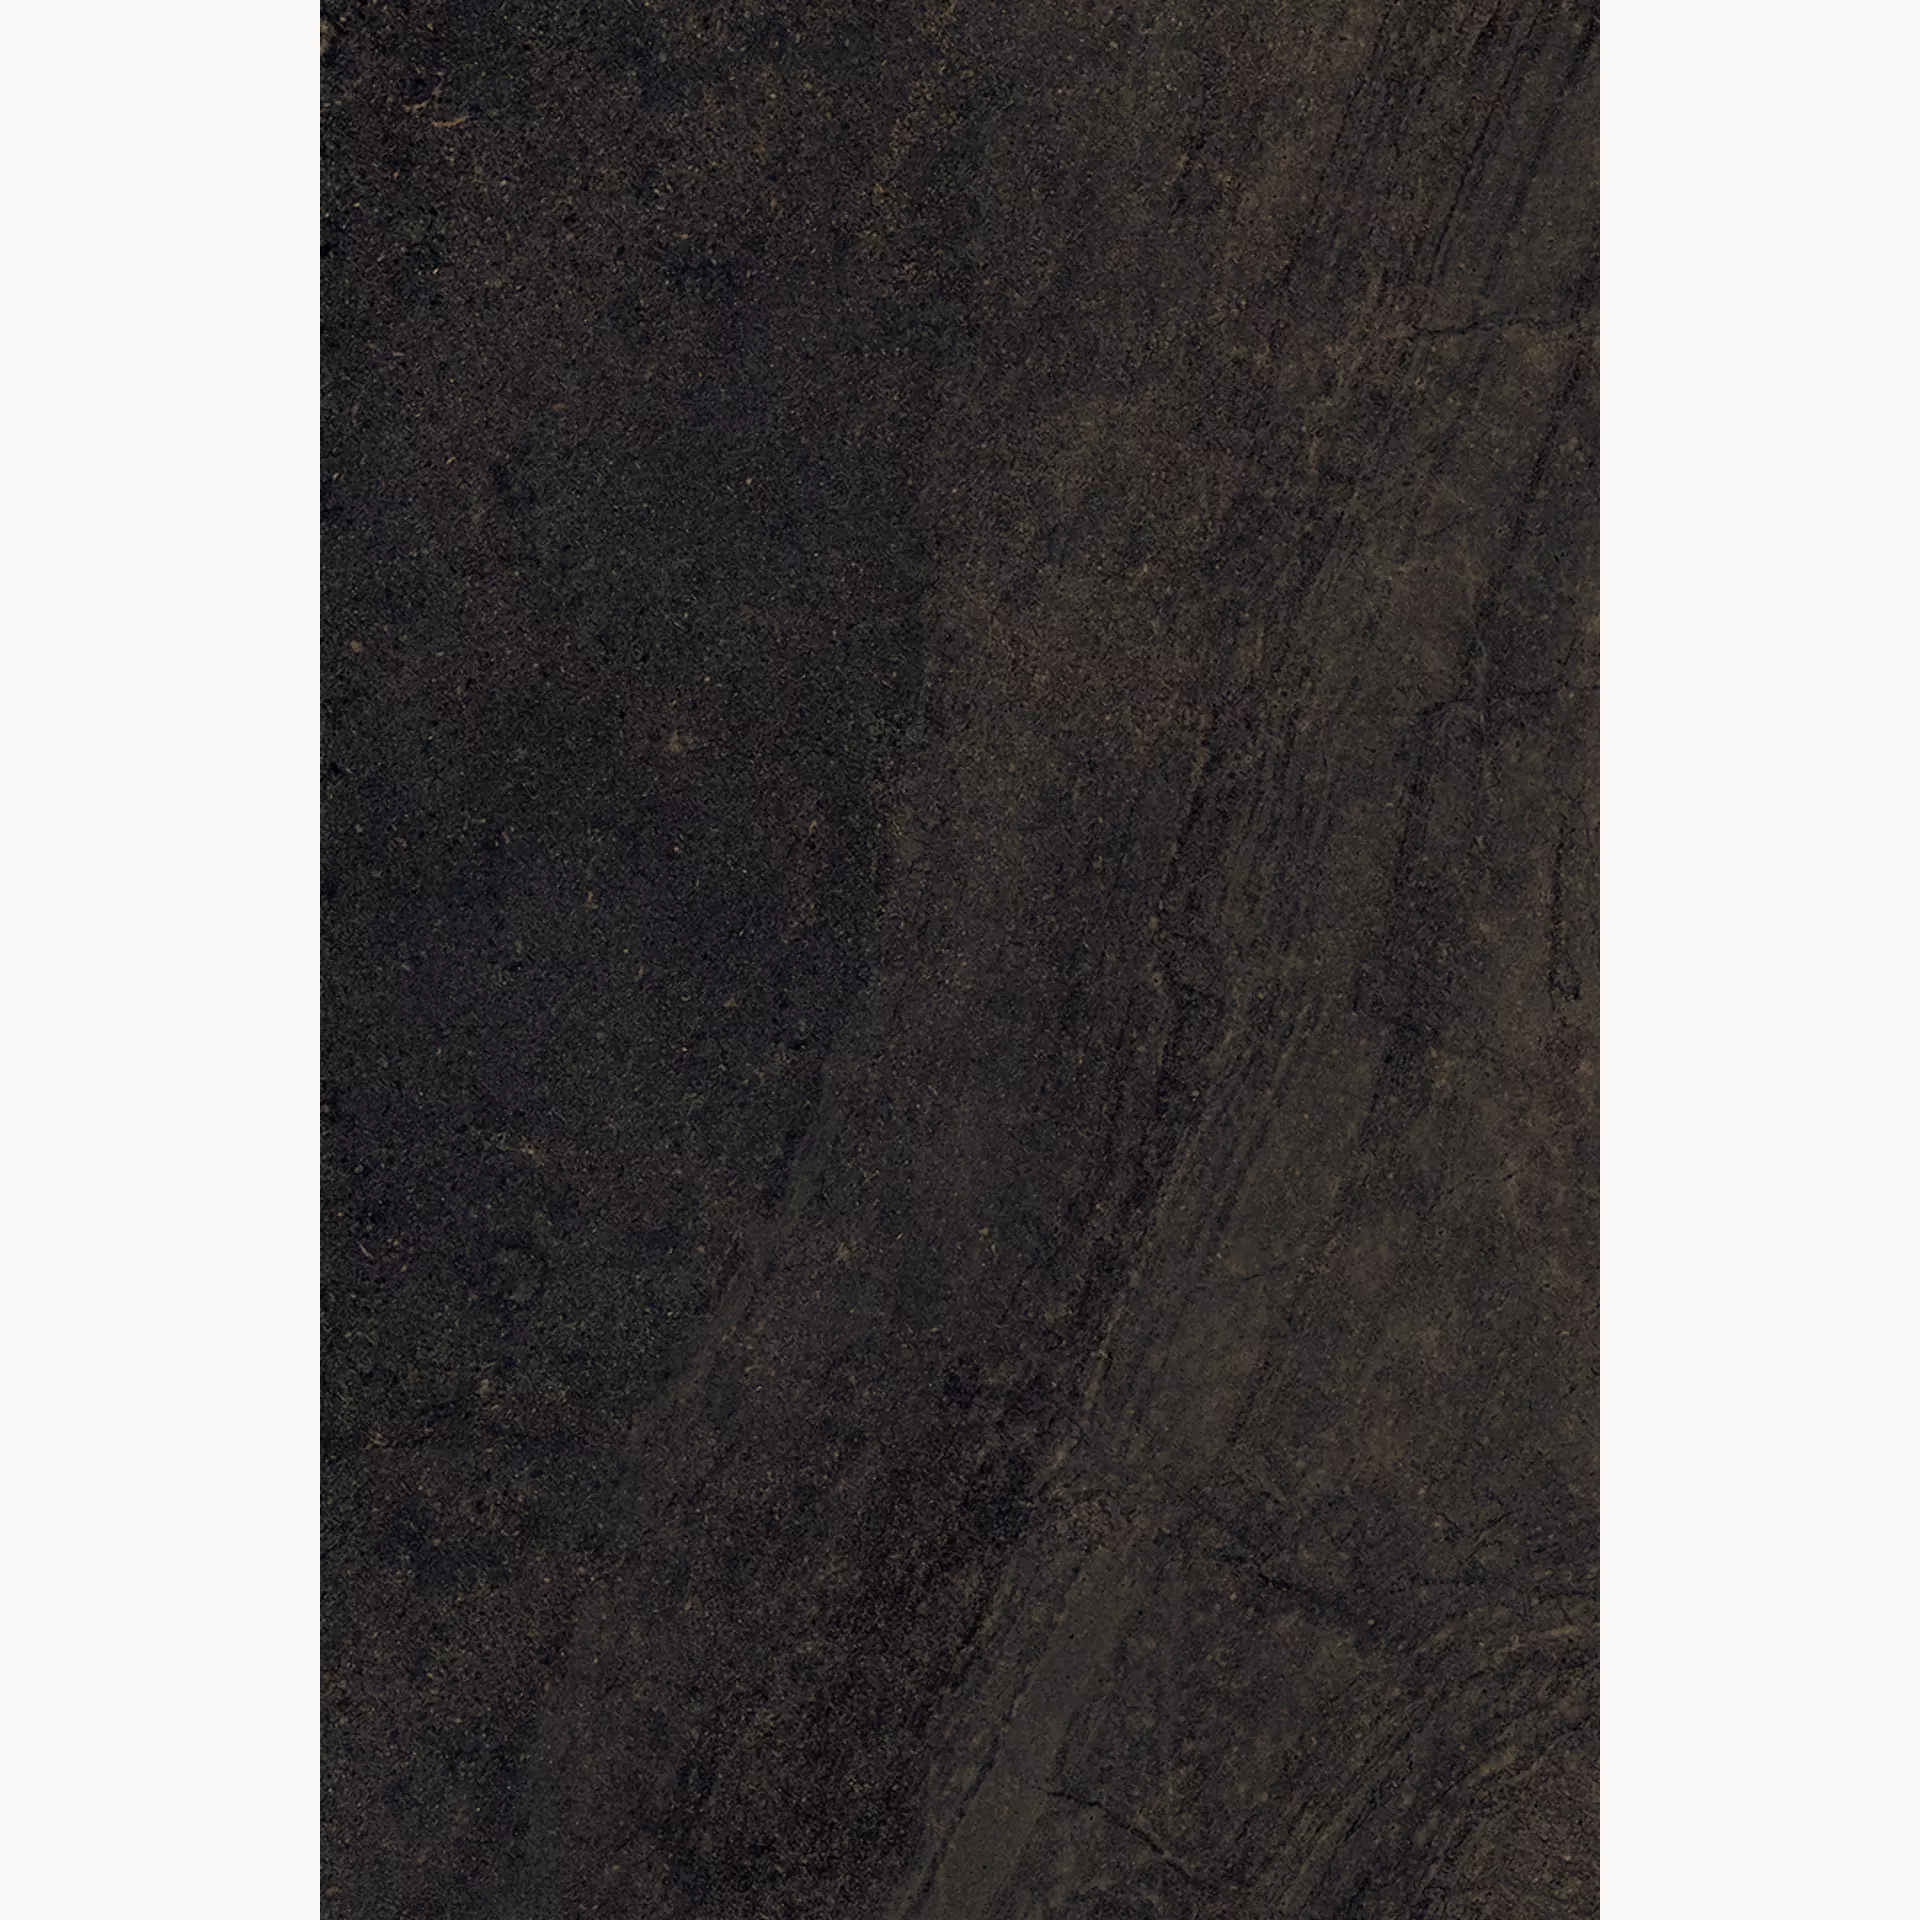 Fondovalle Planeto Pluto Natural PNT291 30x60cm rectified 8,5mm